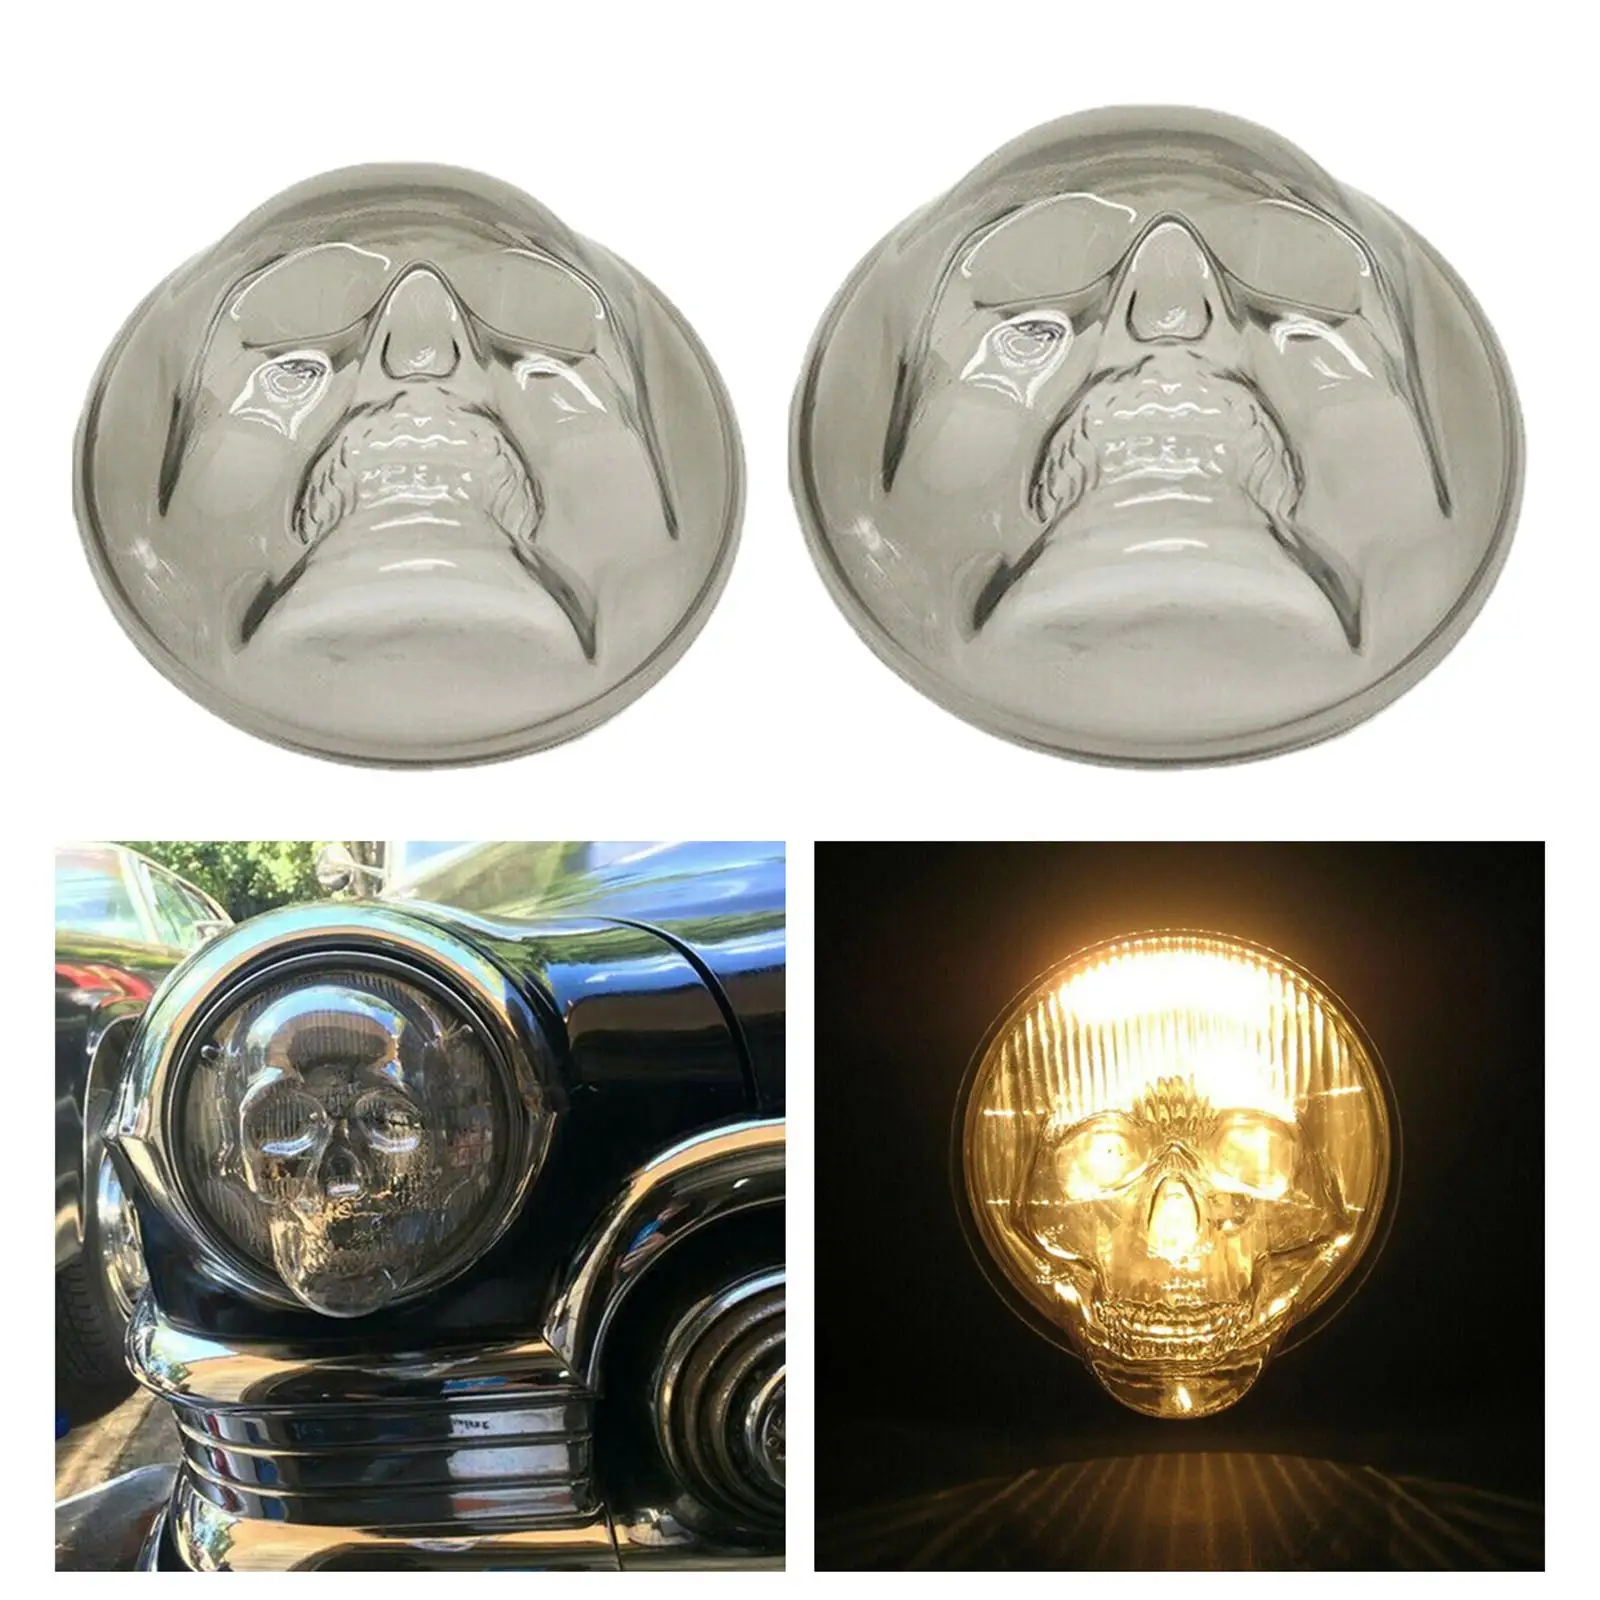 2pcs Vehicle Skull Headlight Covers PC Resin Material Easy to Install Accessories Supplies  for Car Truck Halloween Decoration